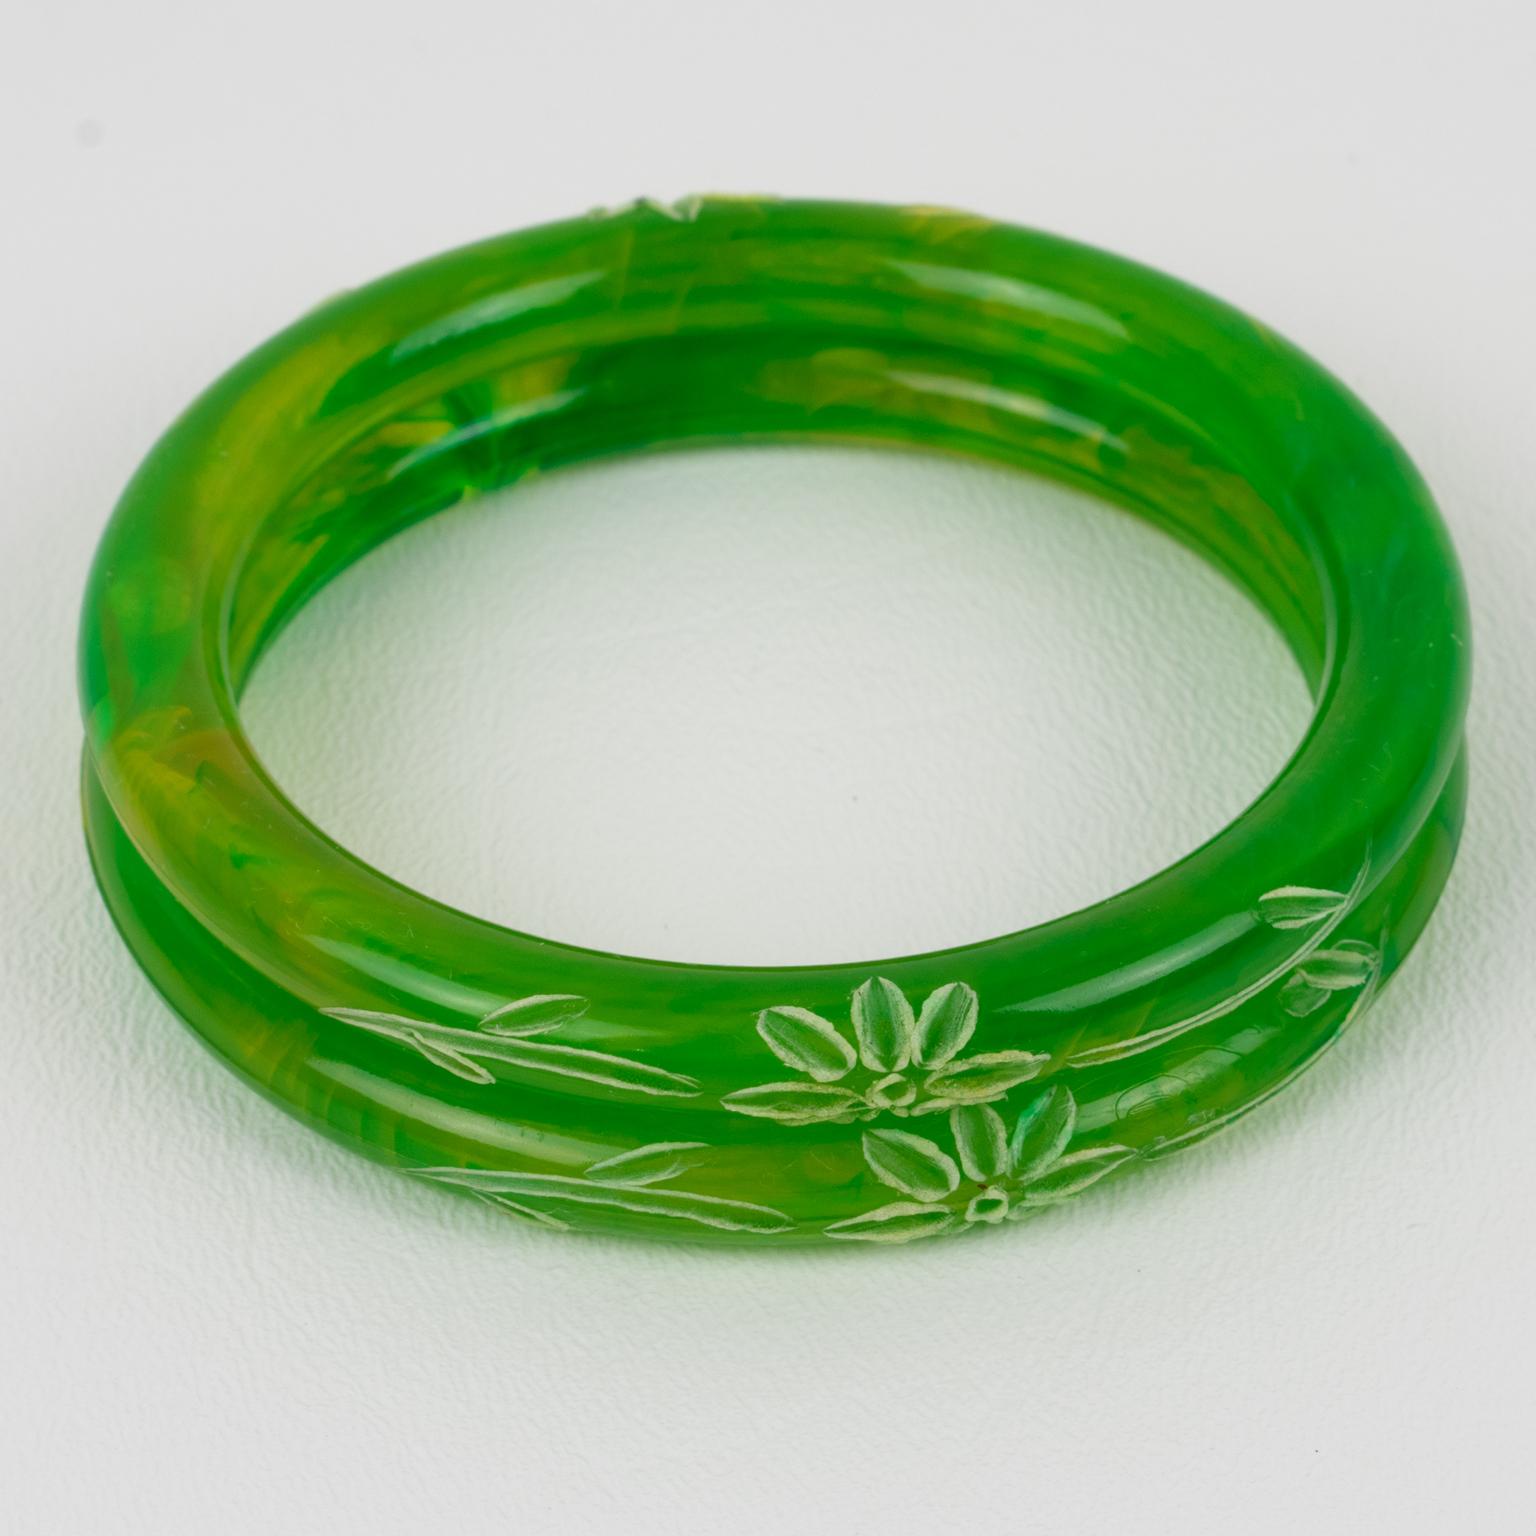 Modern Lucite Bracelet Bangle Green Grass Swirl with Floral Carving, set of 2 pieces For Sale